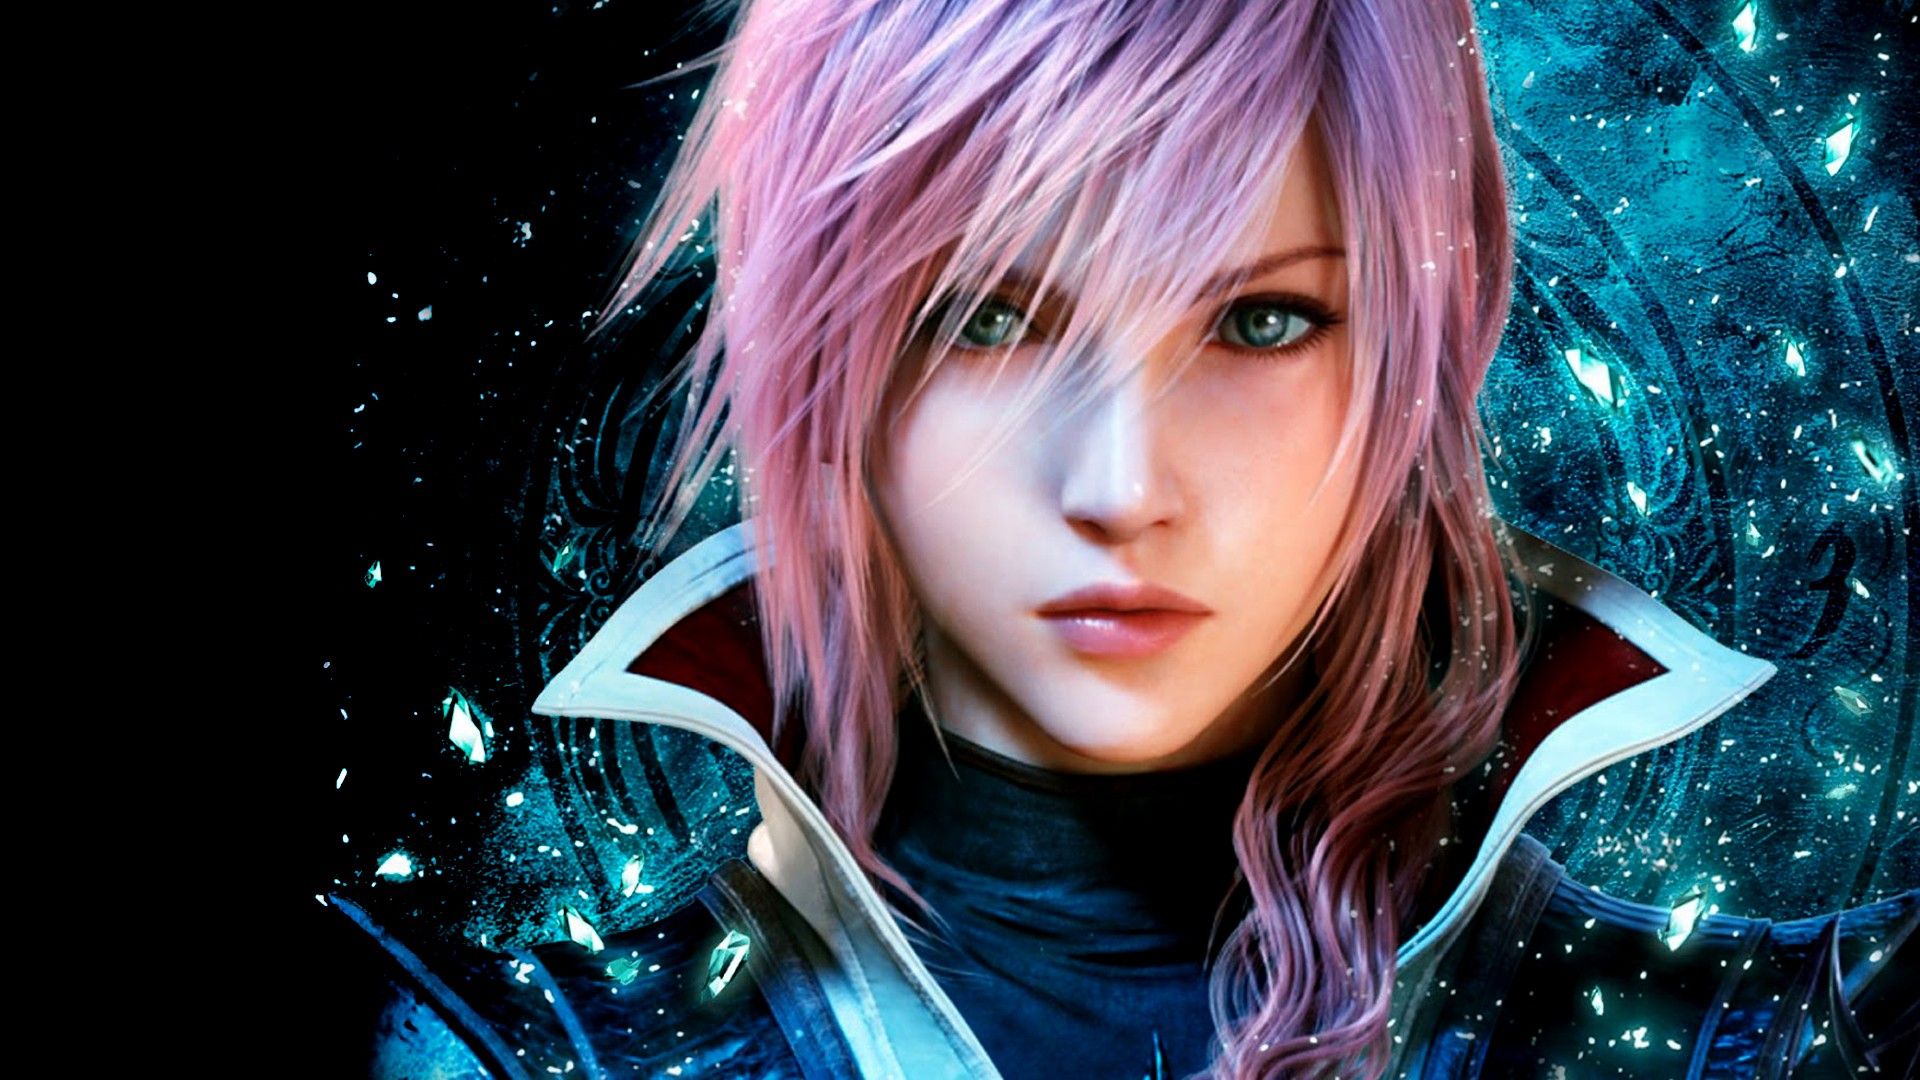 Final Fantasy XIII's Lightning featured in Louis Vuitton fashion